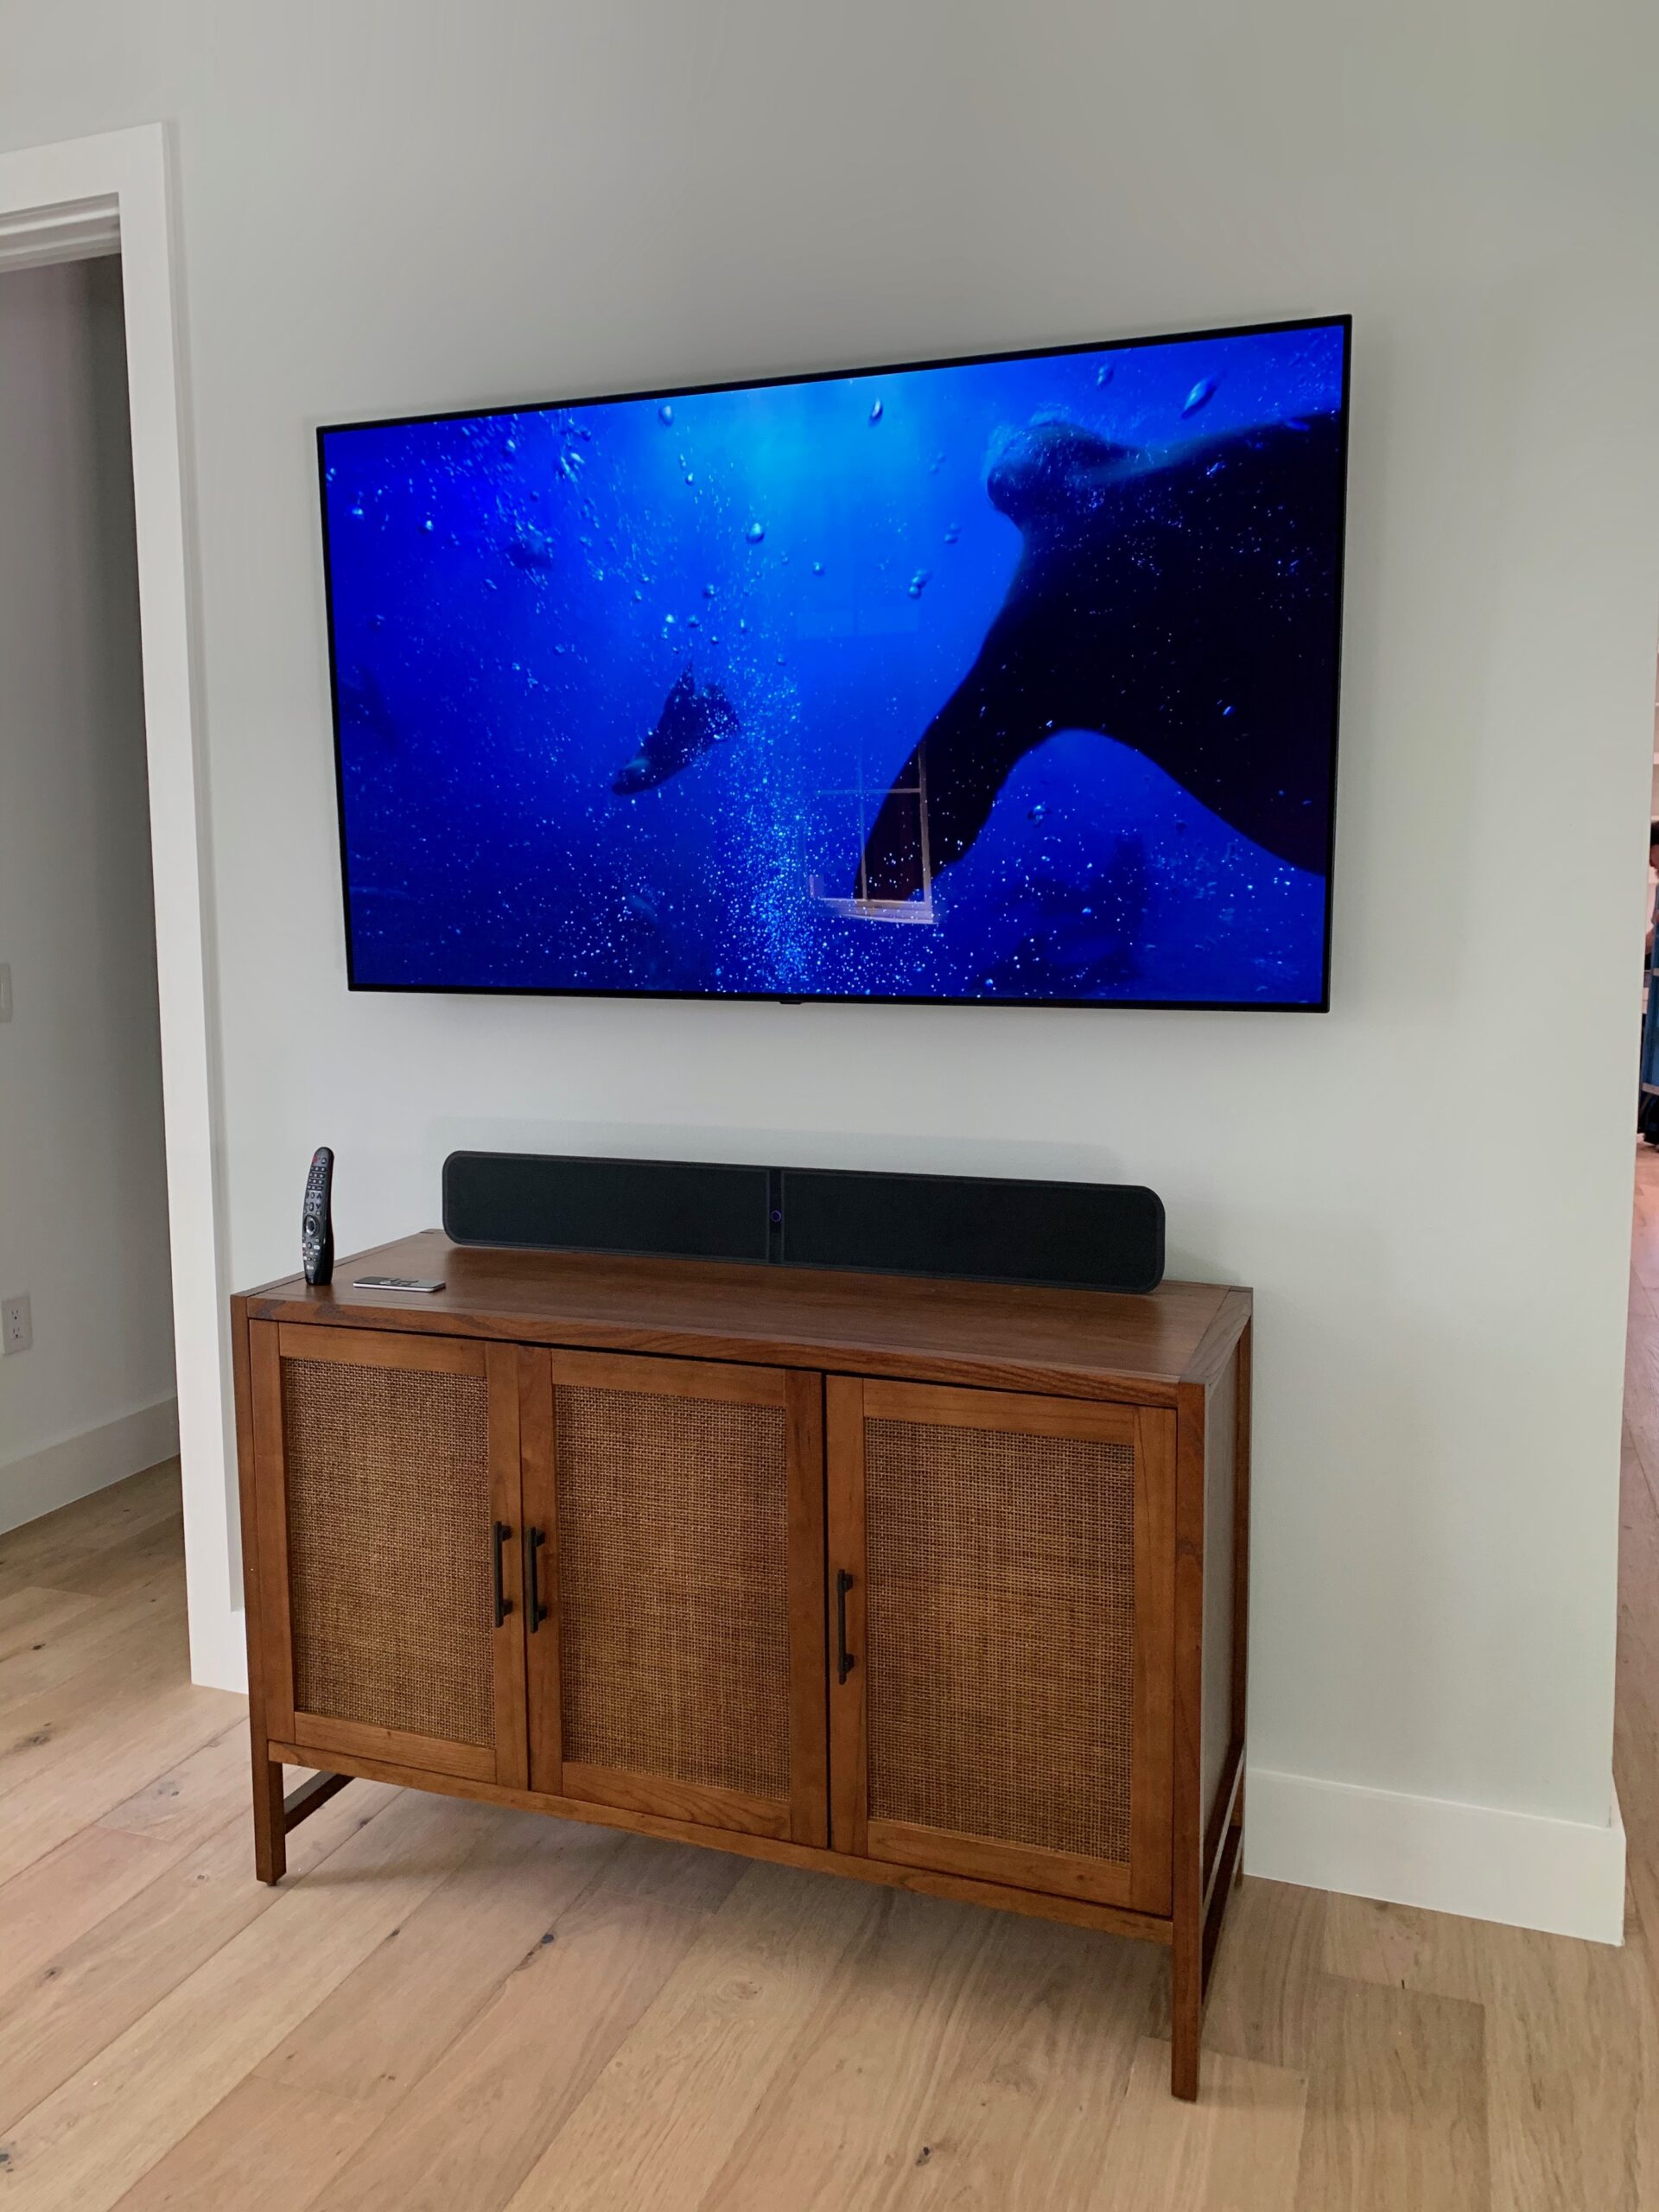 Media room OLED flat screen tv mounted to wall installation